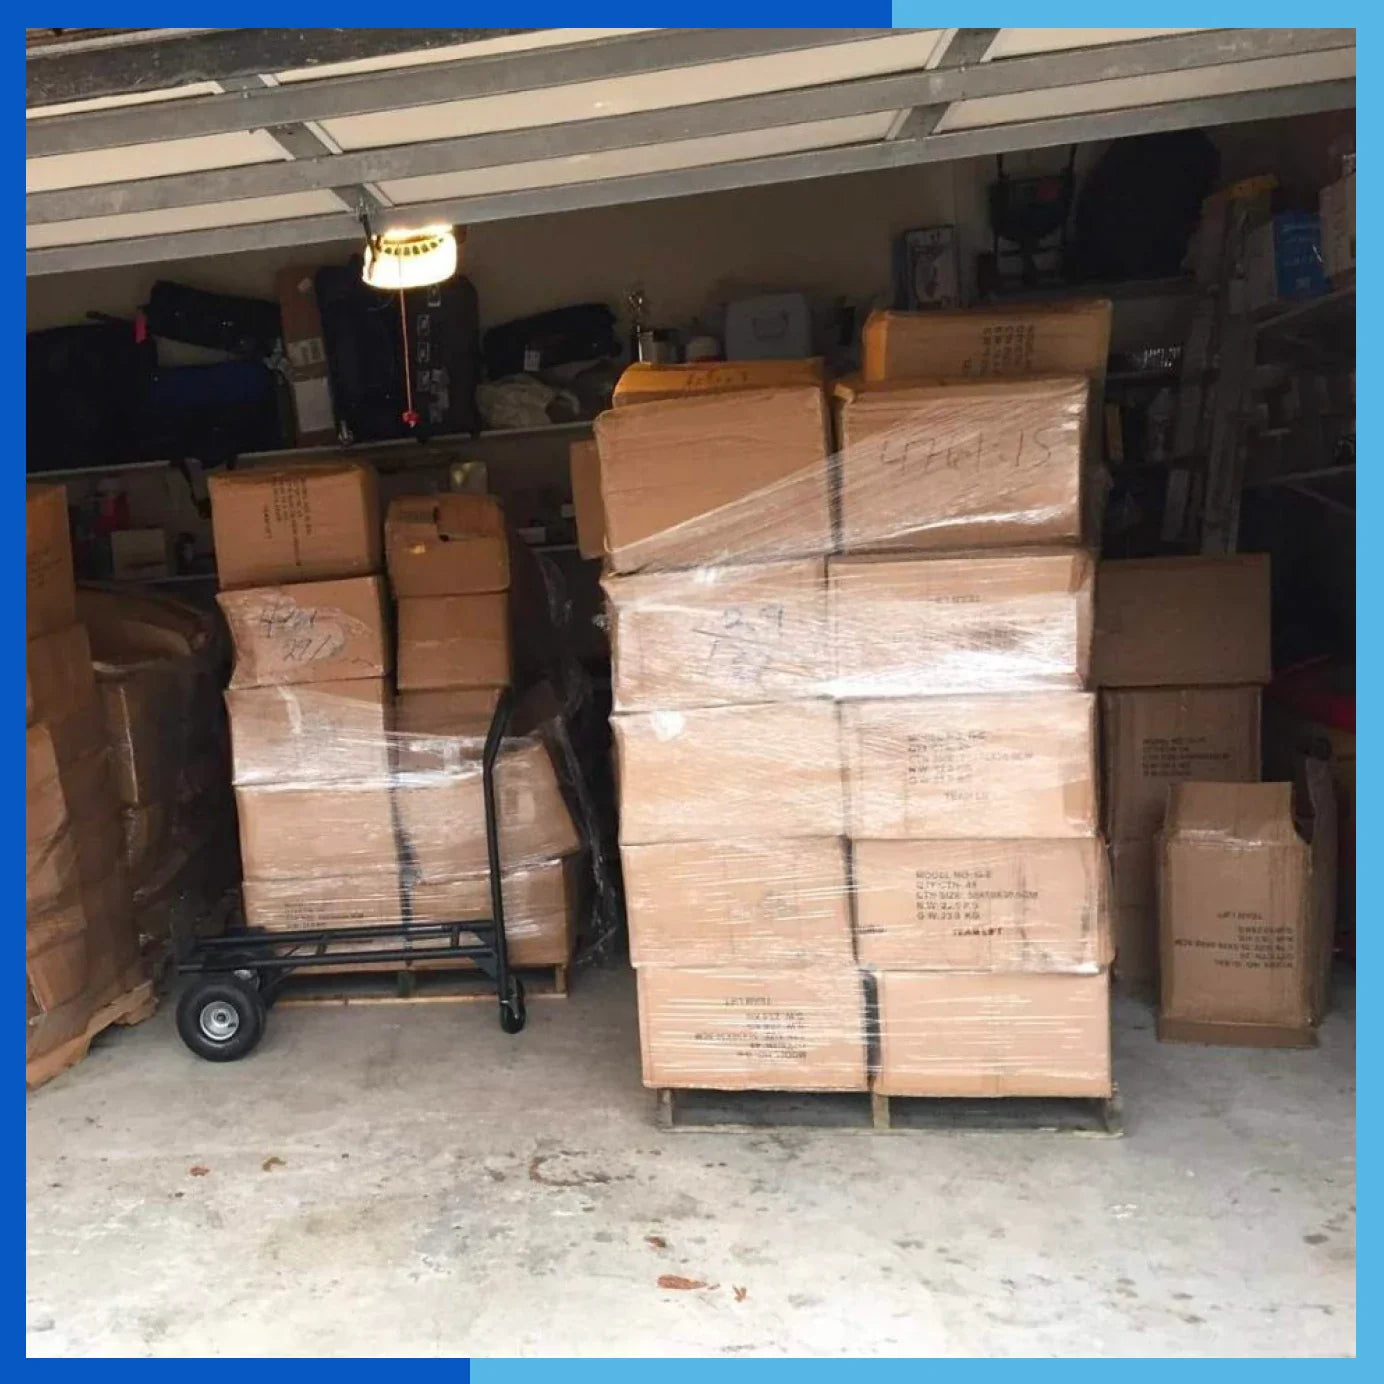 Boxes stacked for shipping inside a residential garage